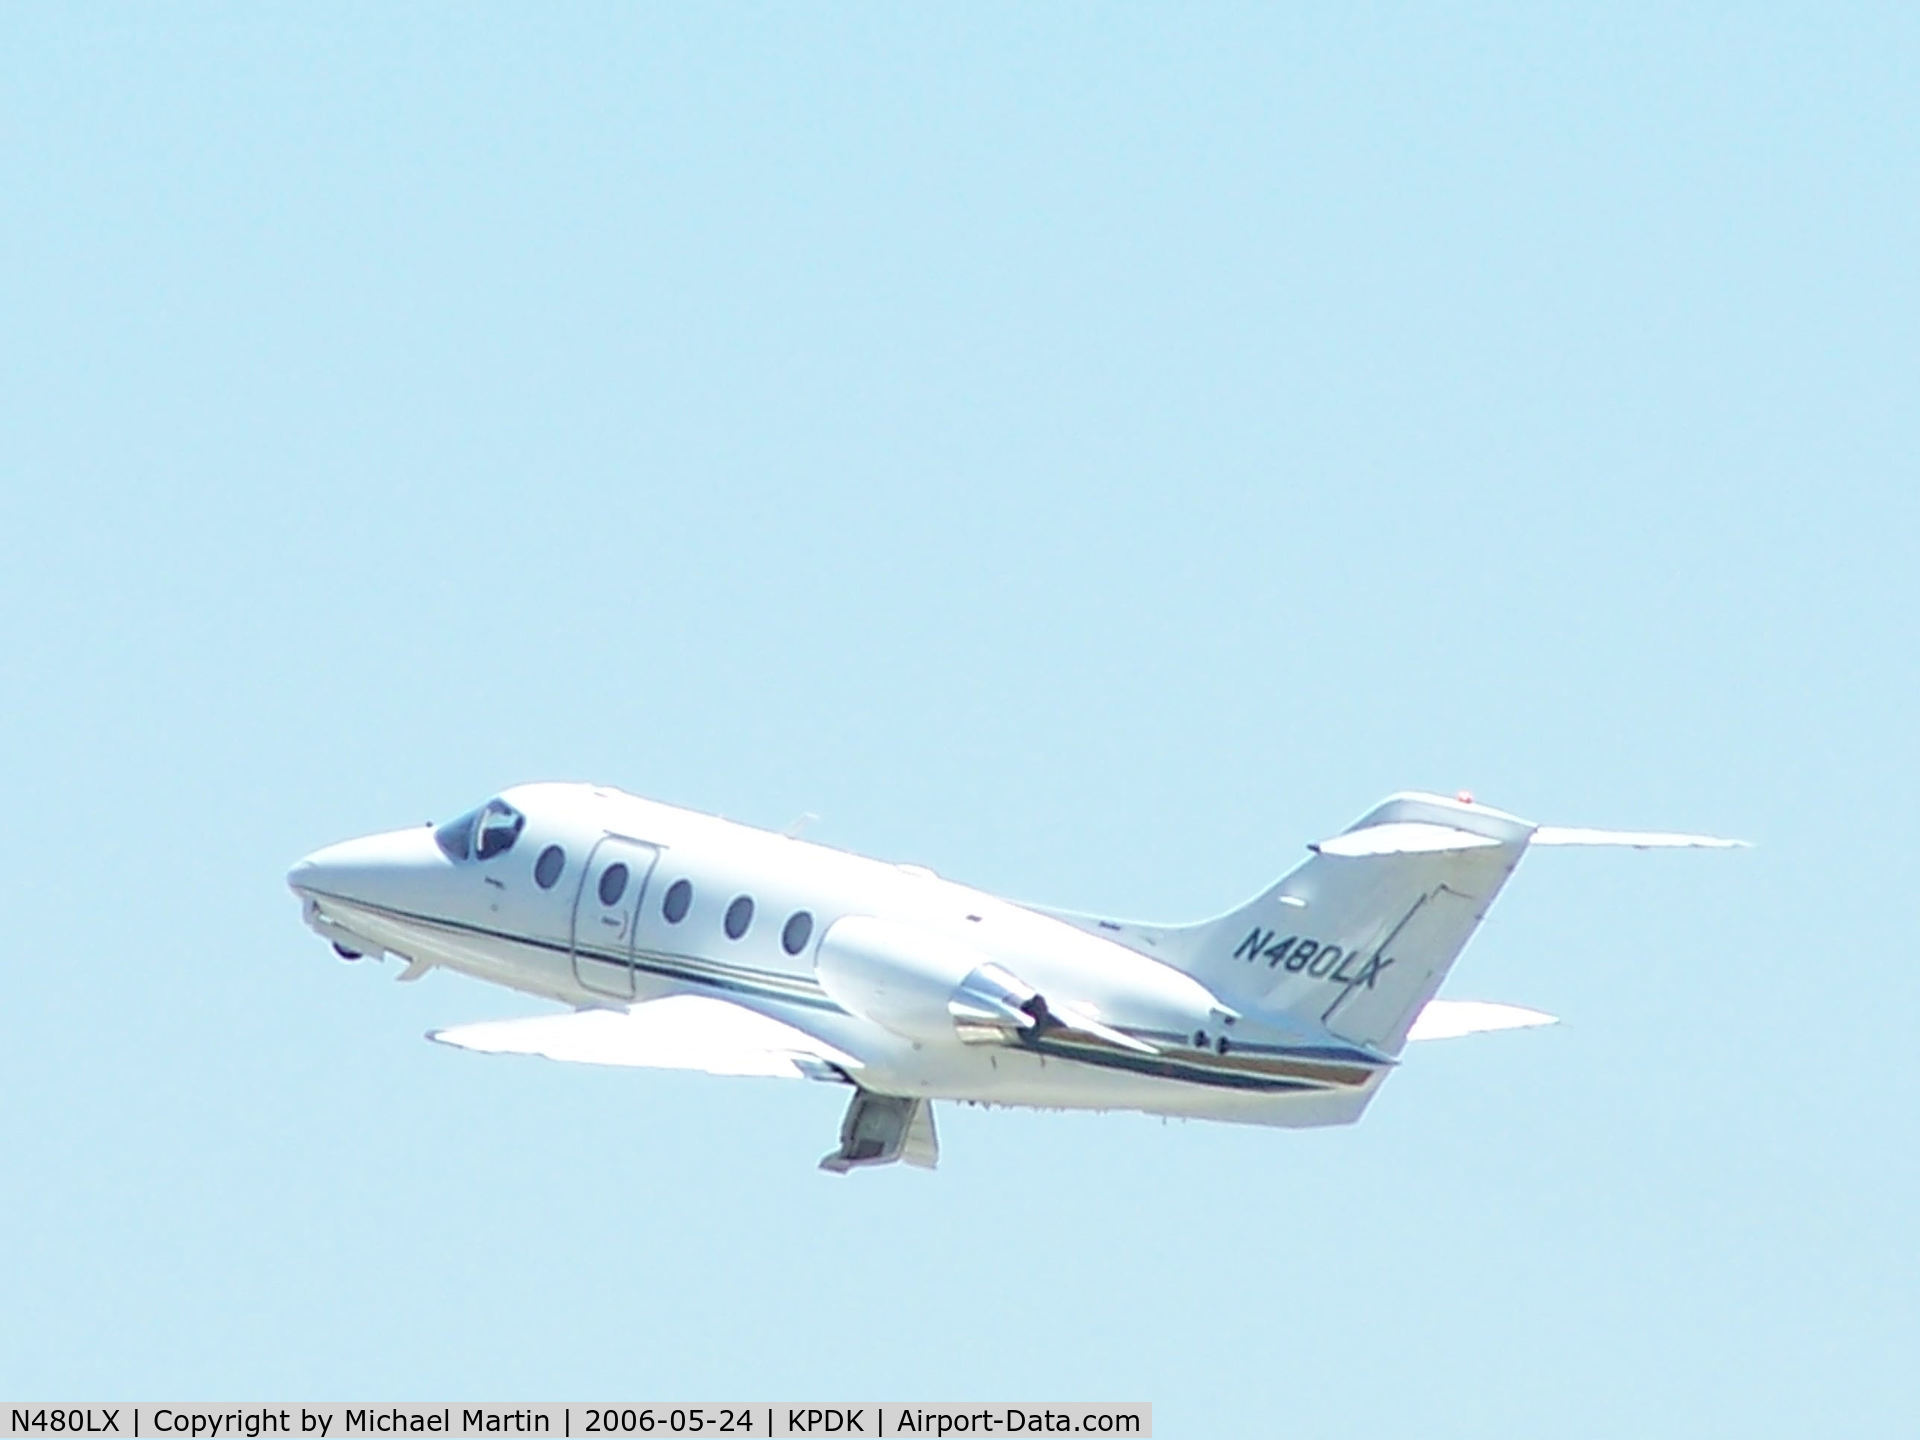 N480LX, Raytheon Aircraft Company 400A C/N RK-398, Departing PDK enroute to KAVL